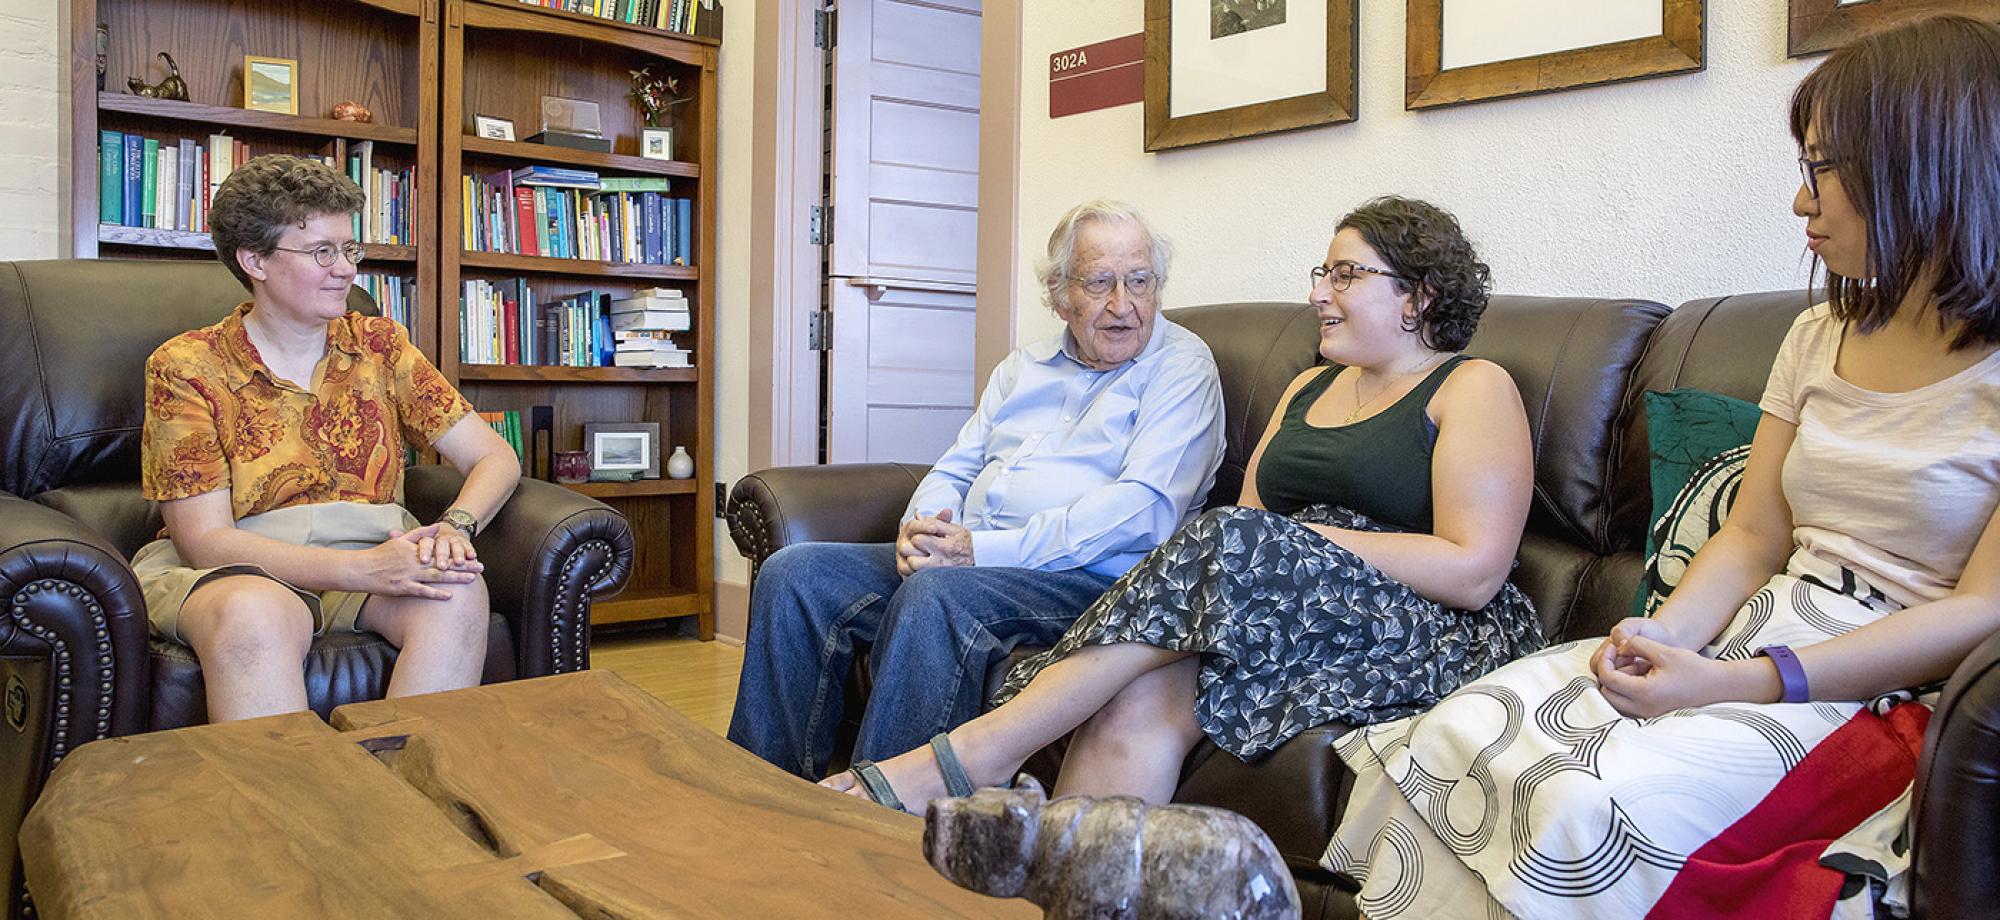 Noam Chomsky speaking with Linguistics department members.